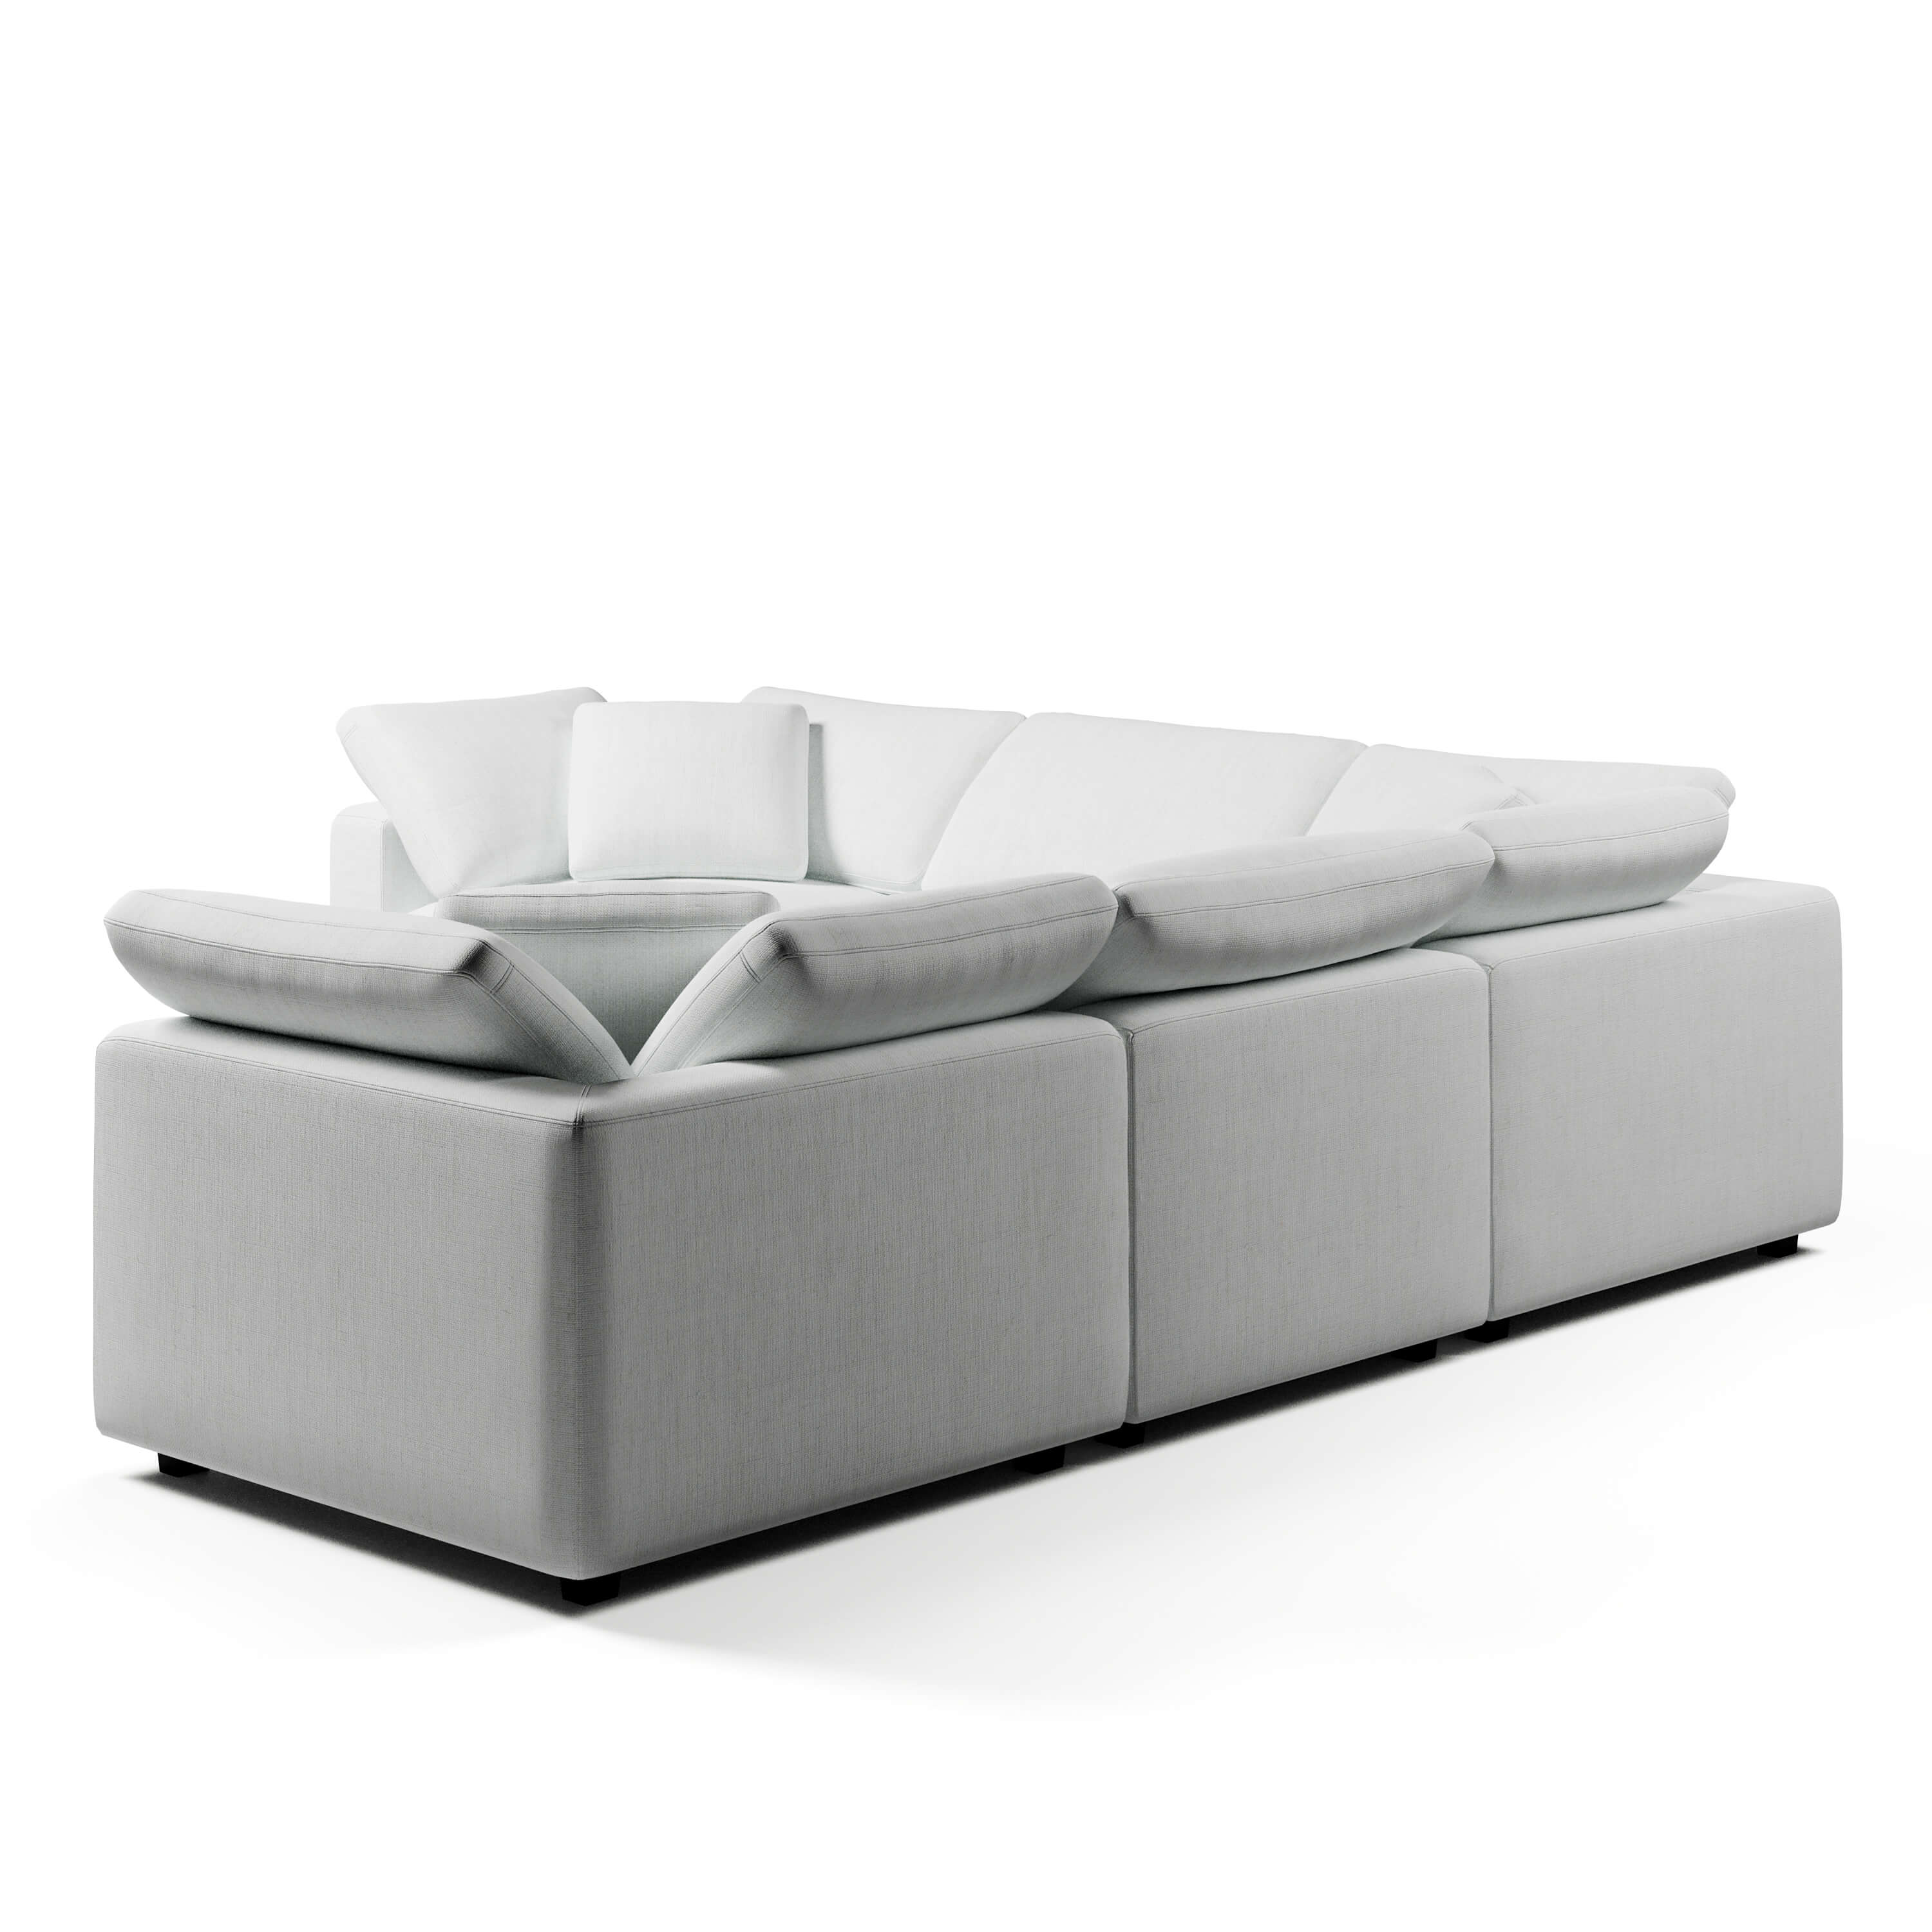 Comfortable L-Shaped Couch | Comfy L Couch | Couch Haus